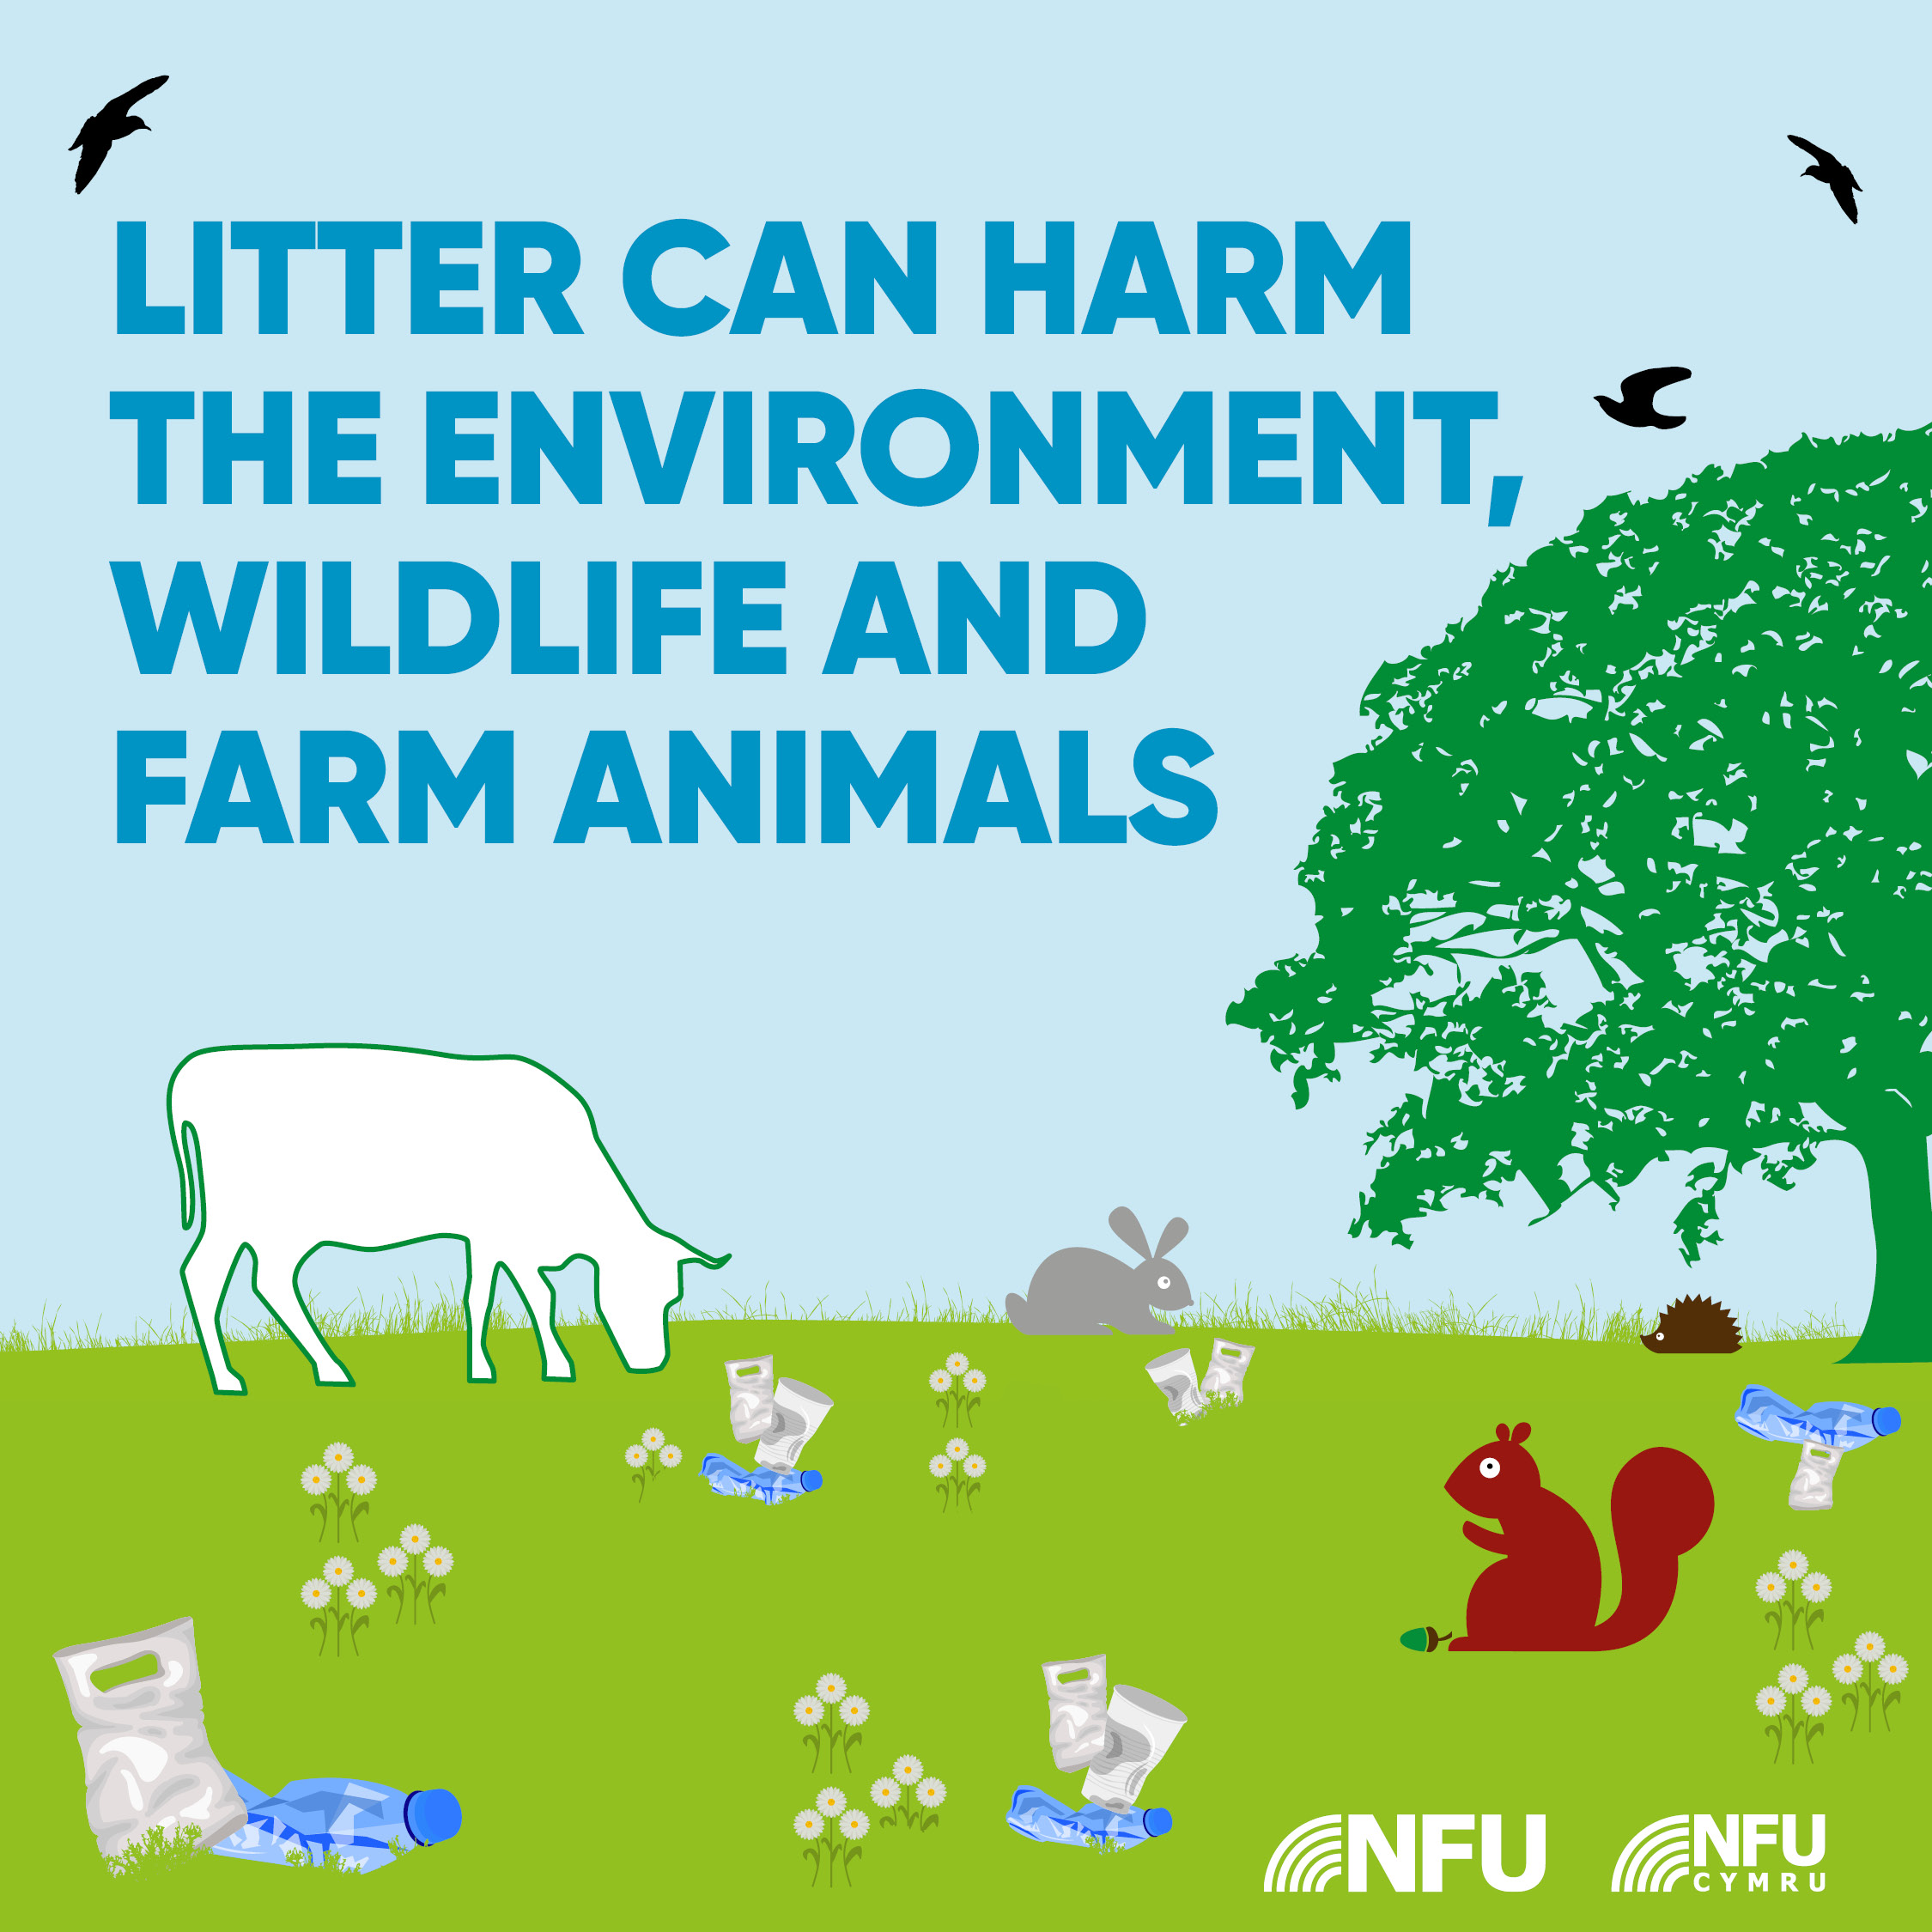 Litter can harm the environment wildlife and farm animals